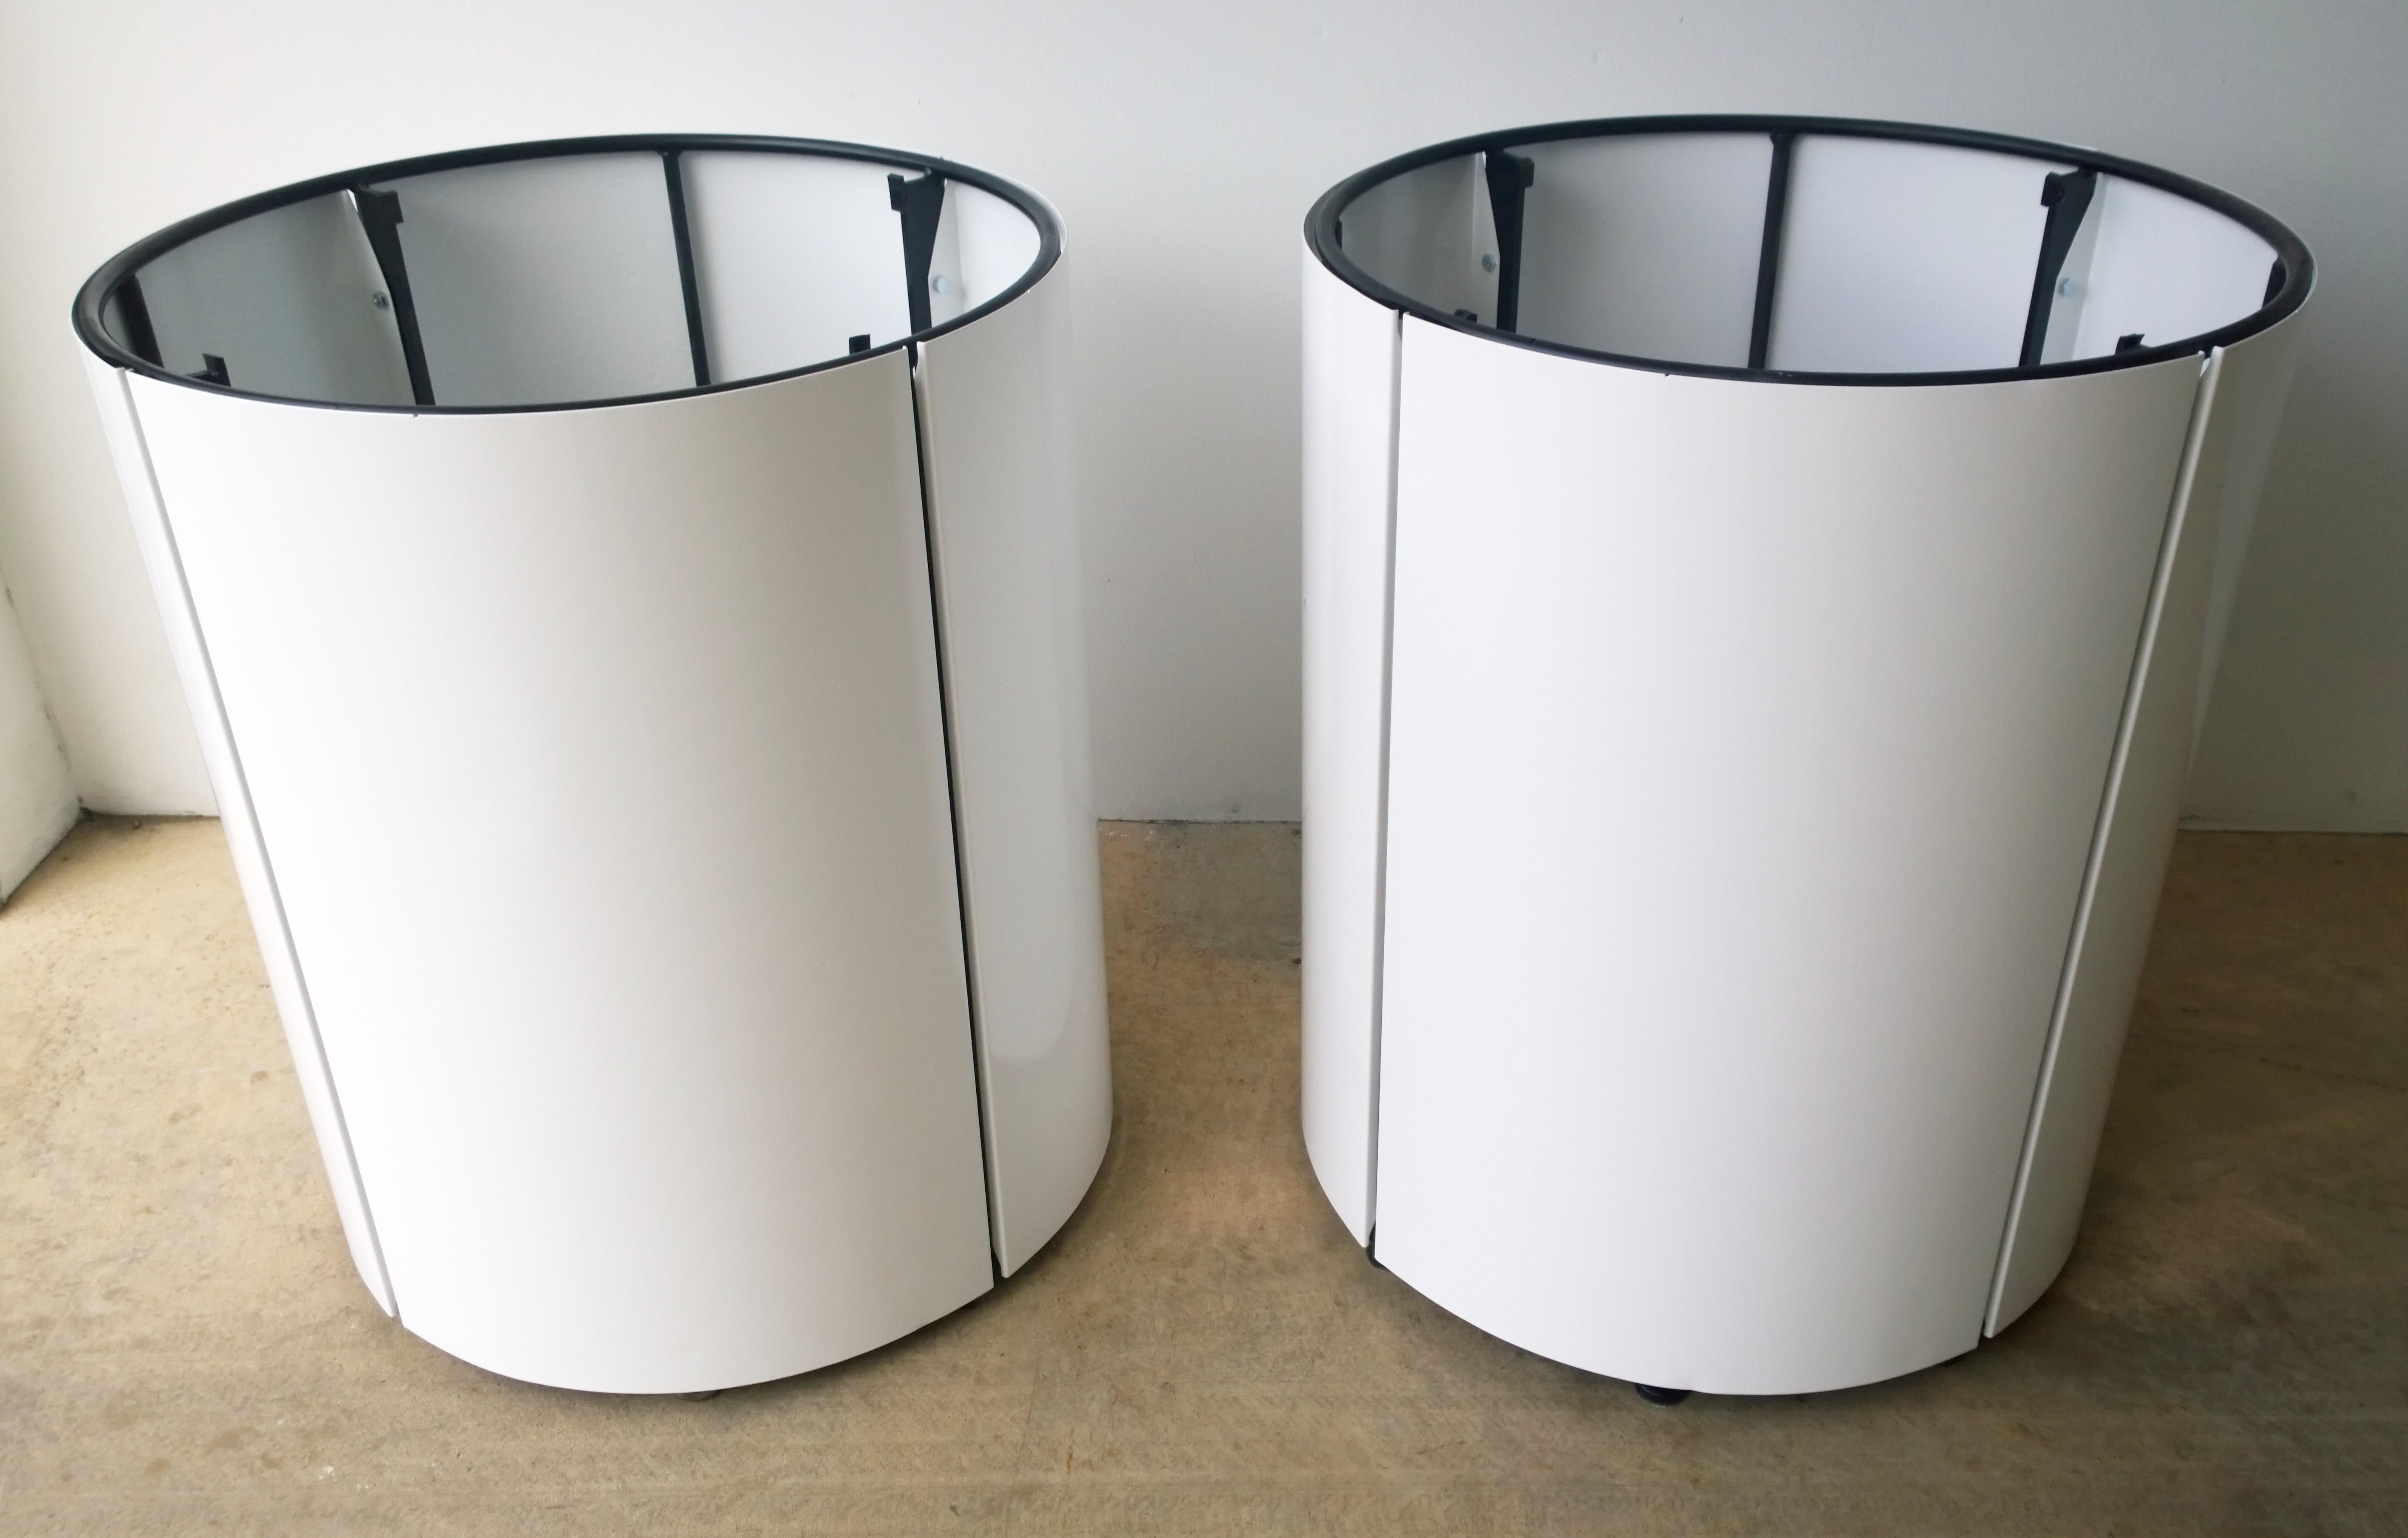 Offered is a Mid-Century Modern pair of newly powder-coated in white over metal panels attached to a black metal frame large planters. The planters each have a circular concrete block at the base for stabilization. The planters drain through the